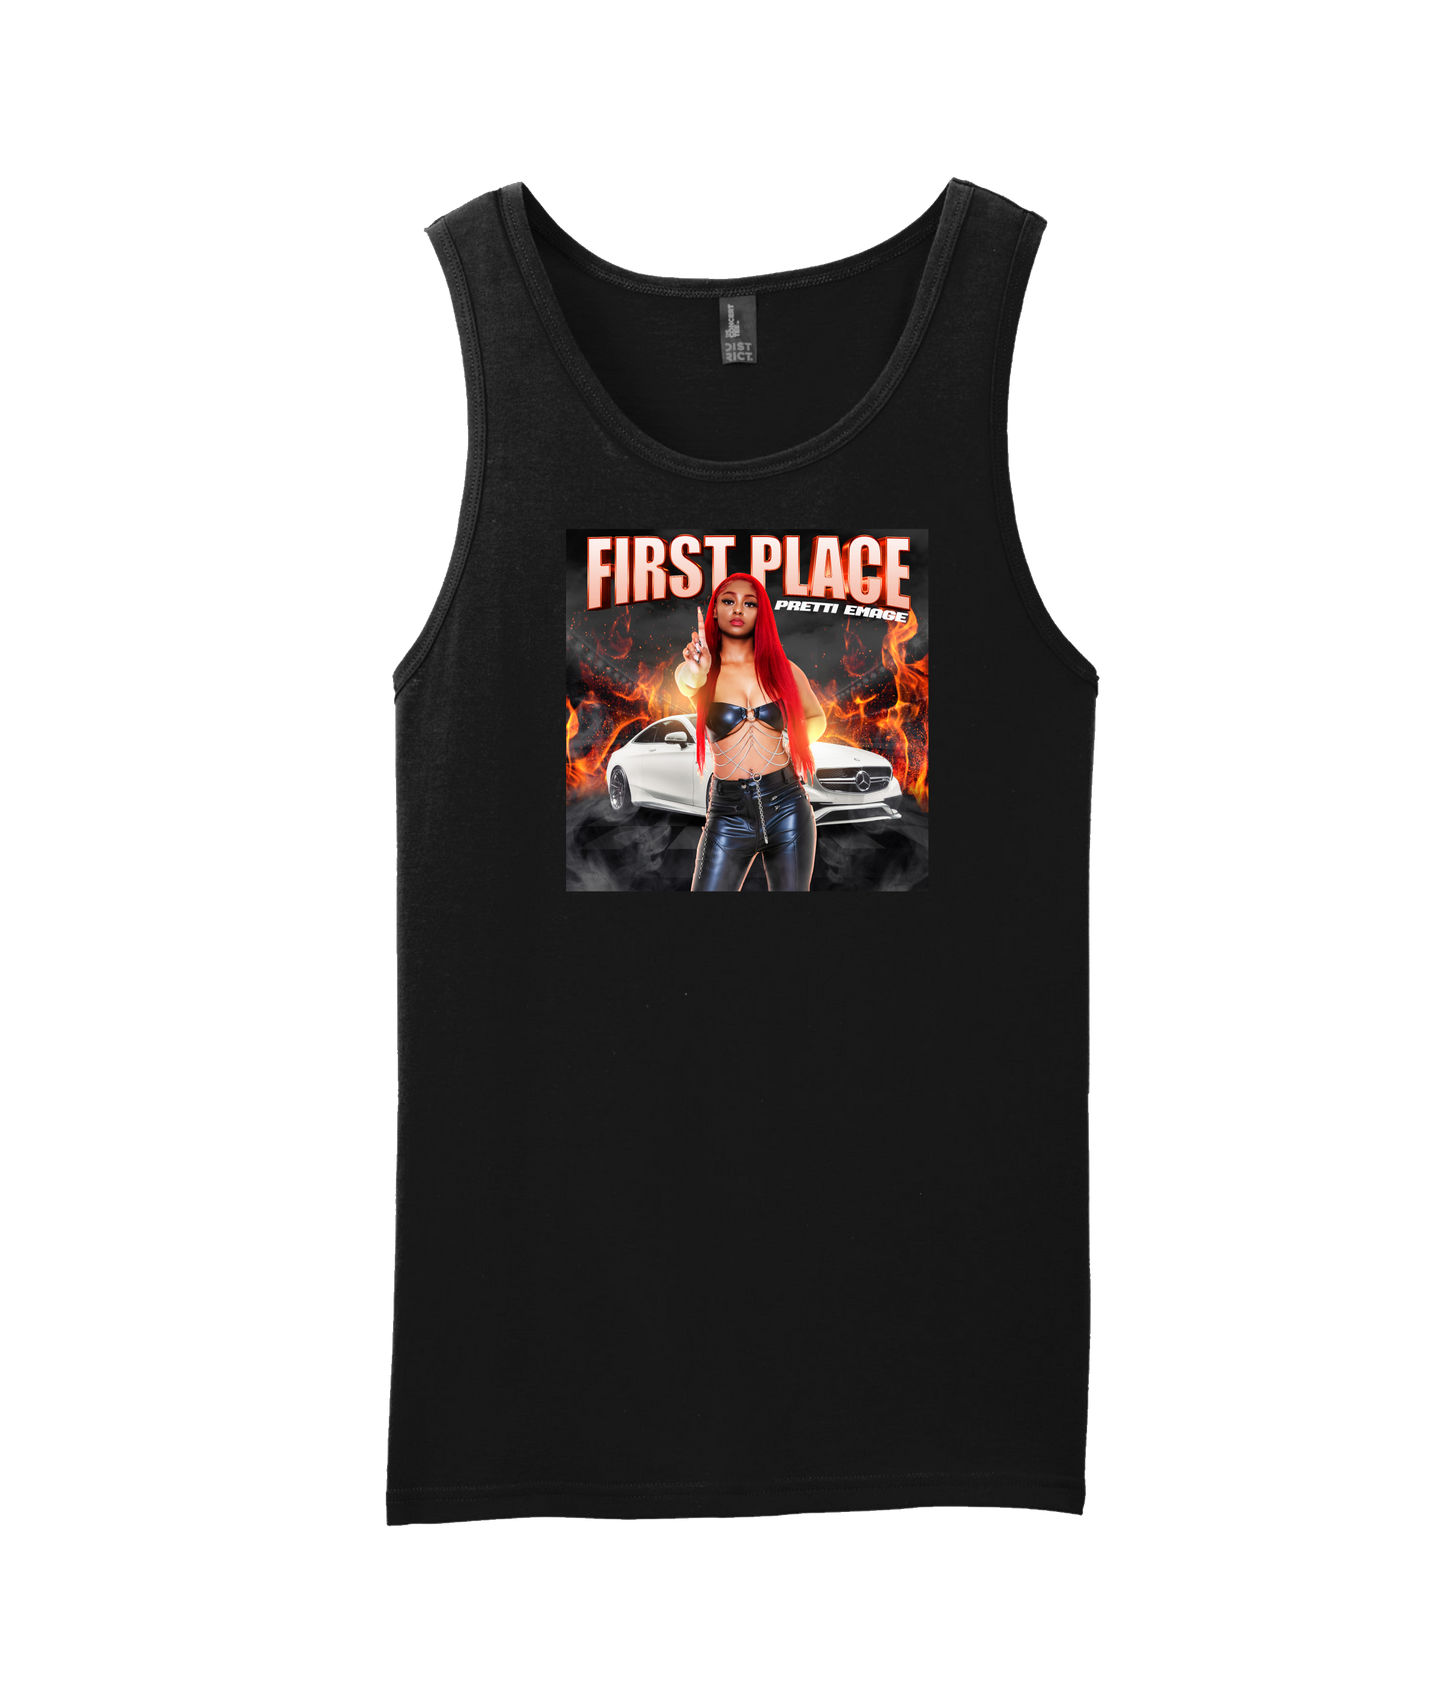 Pretti Emage - First Place - Black Tank Top